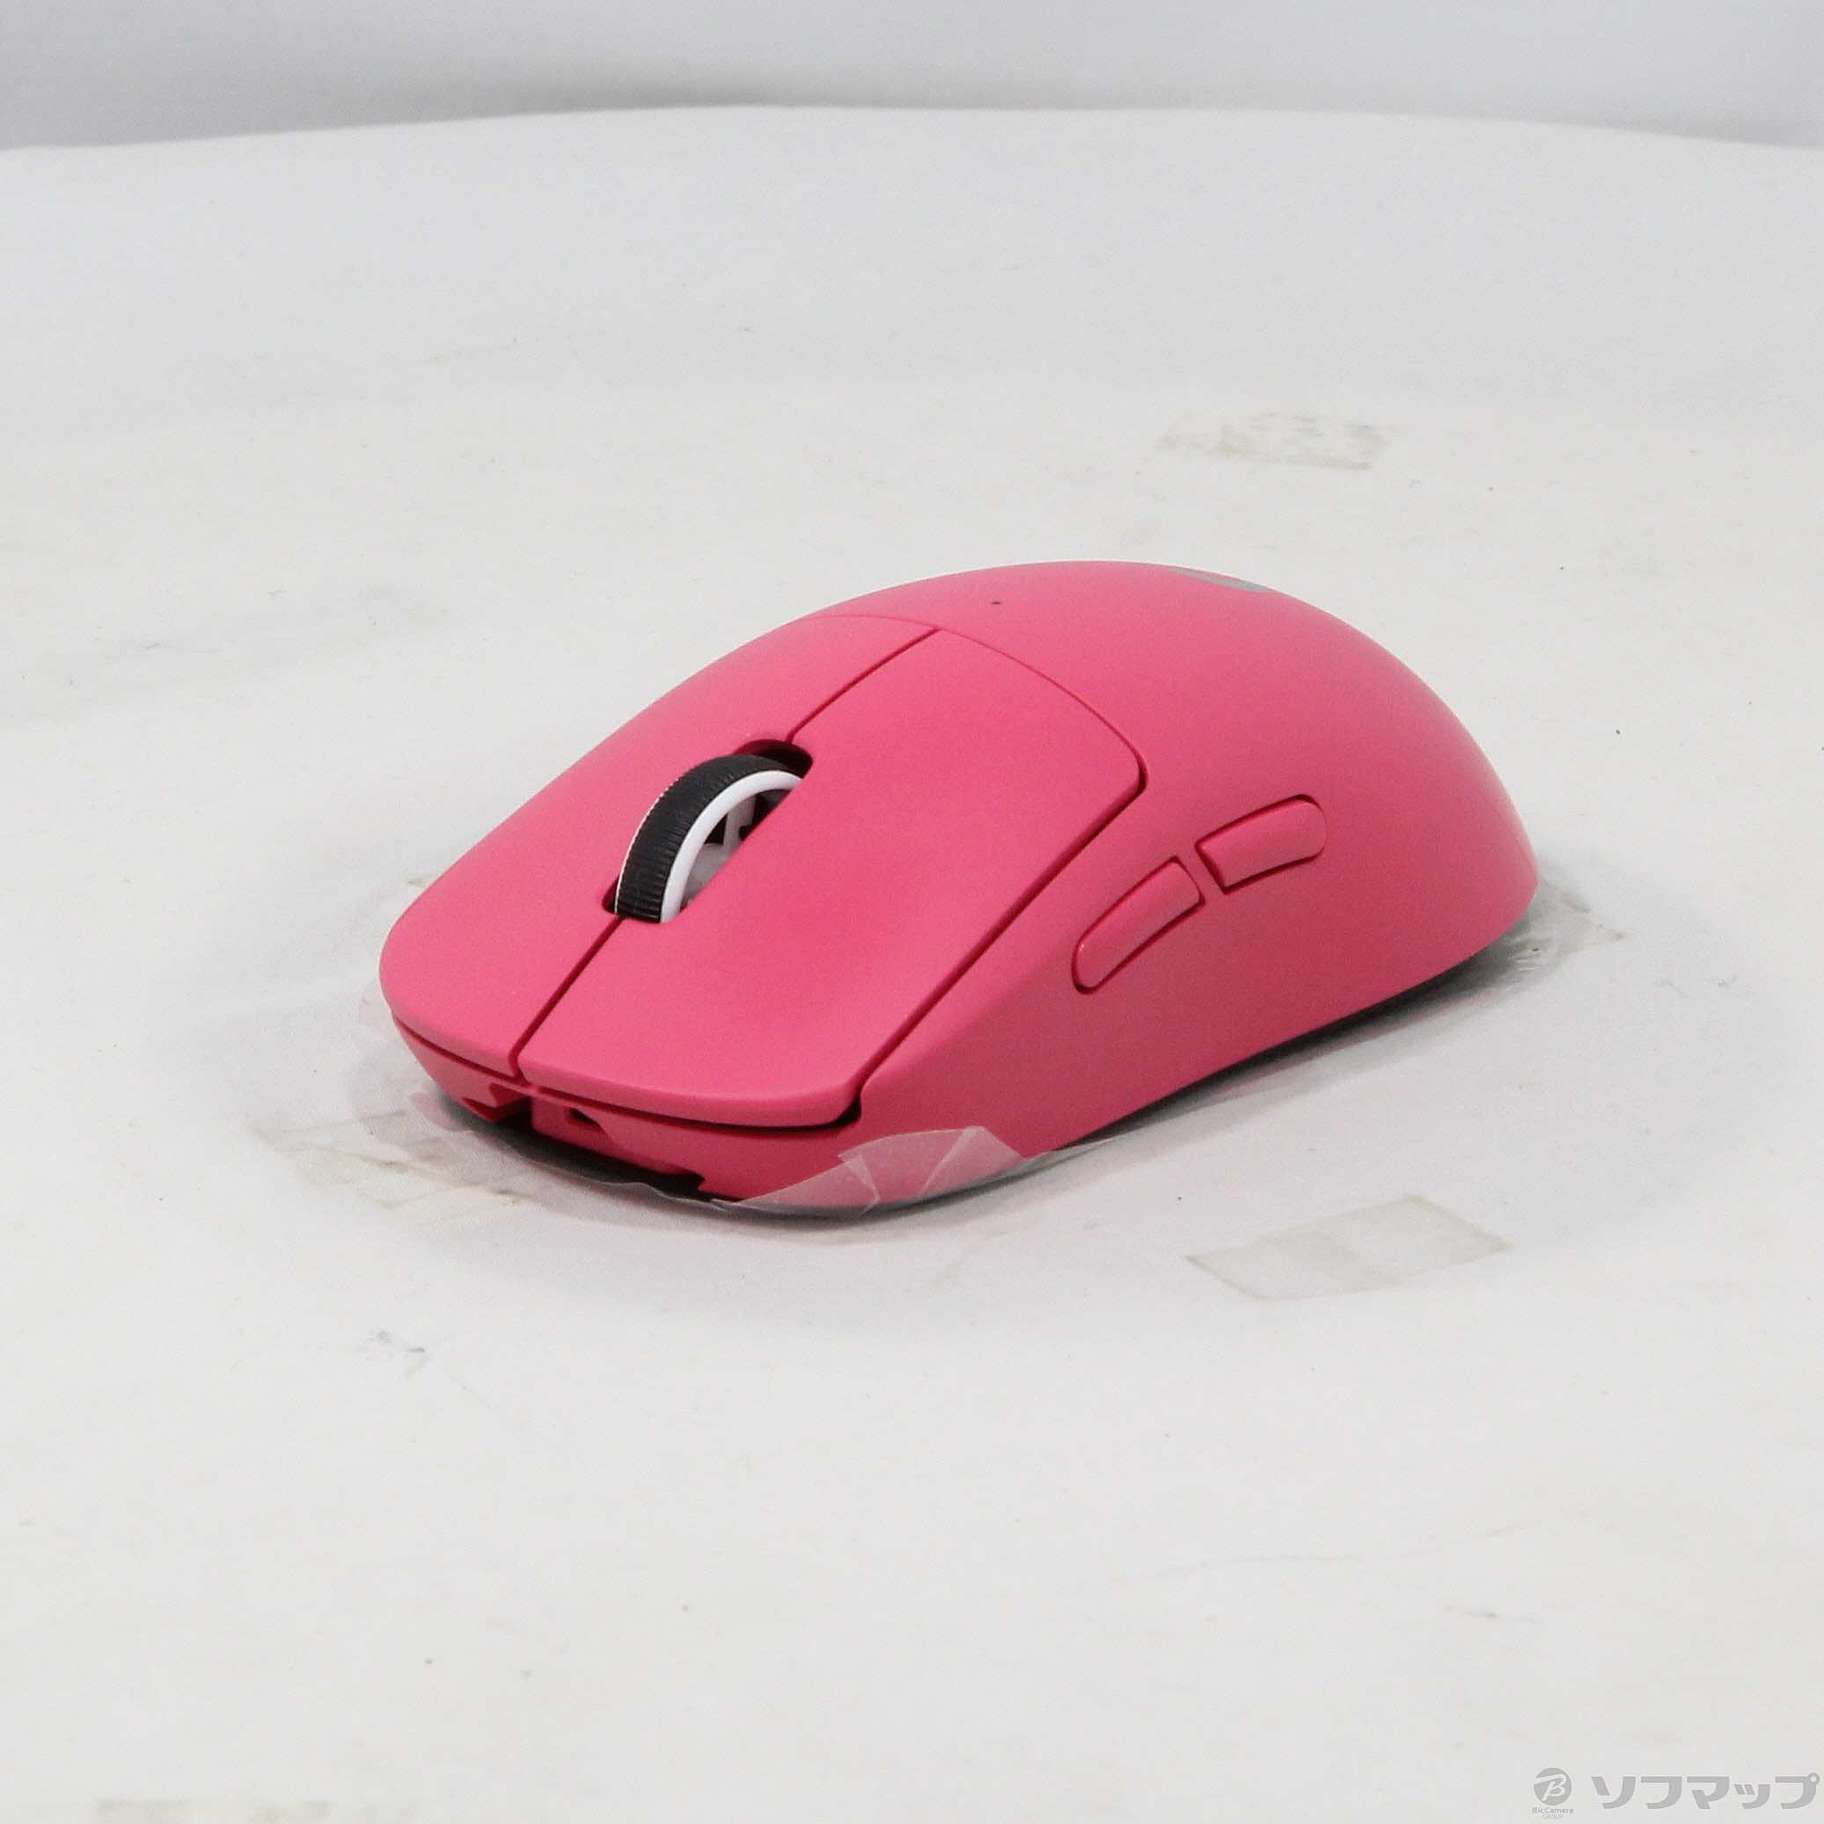 Logicool PRO X SUPERLIGHT Wireless Gaming Mouse マゼンタ G-PPD-003WL-MG